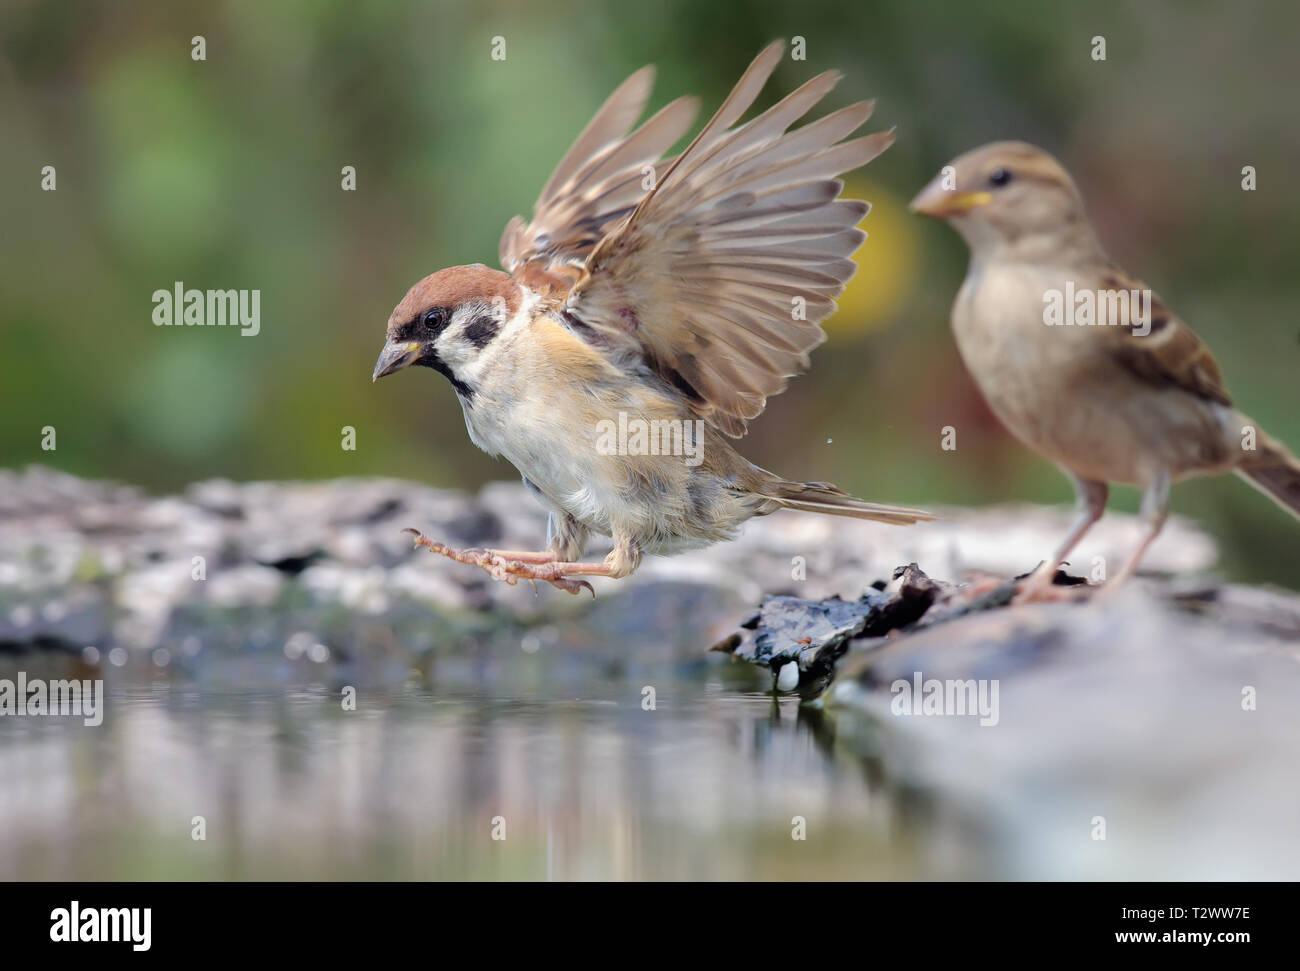 Eurasian Tree Sparrow jumping into water with open wings Stock Photo